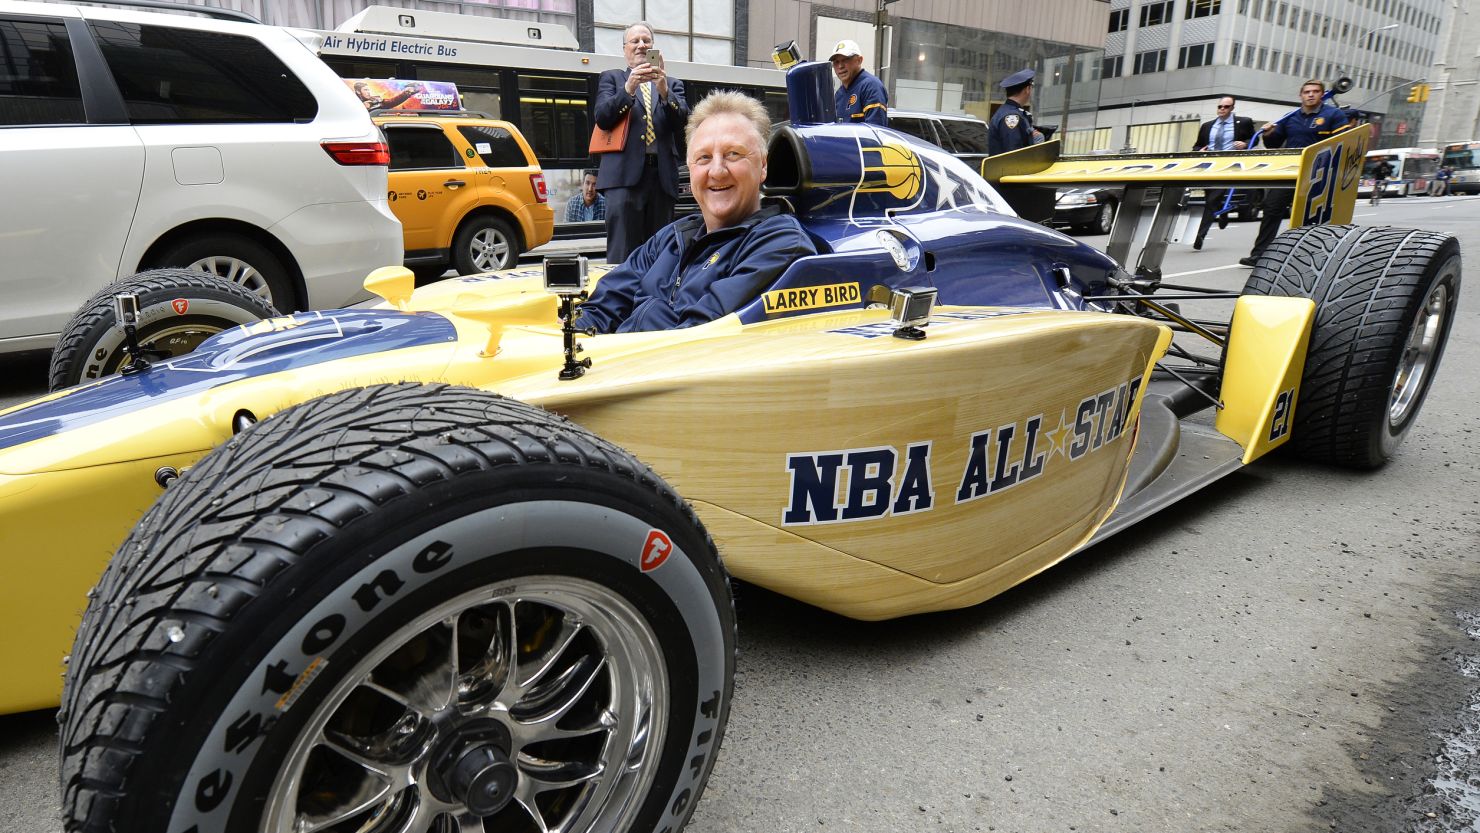 Basketball legend Larry Bird cruised up to NBA headquarters in an IndyCar racer on Monday.